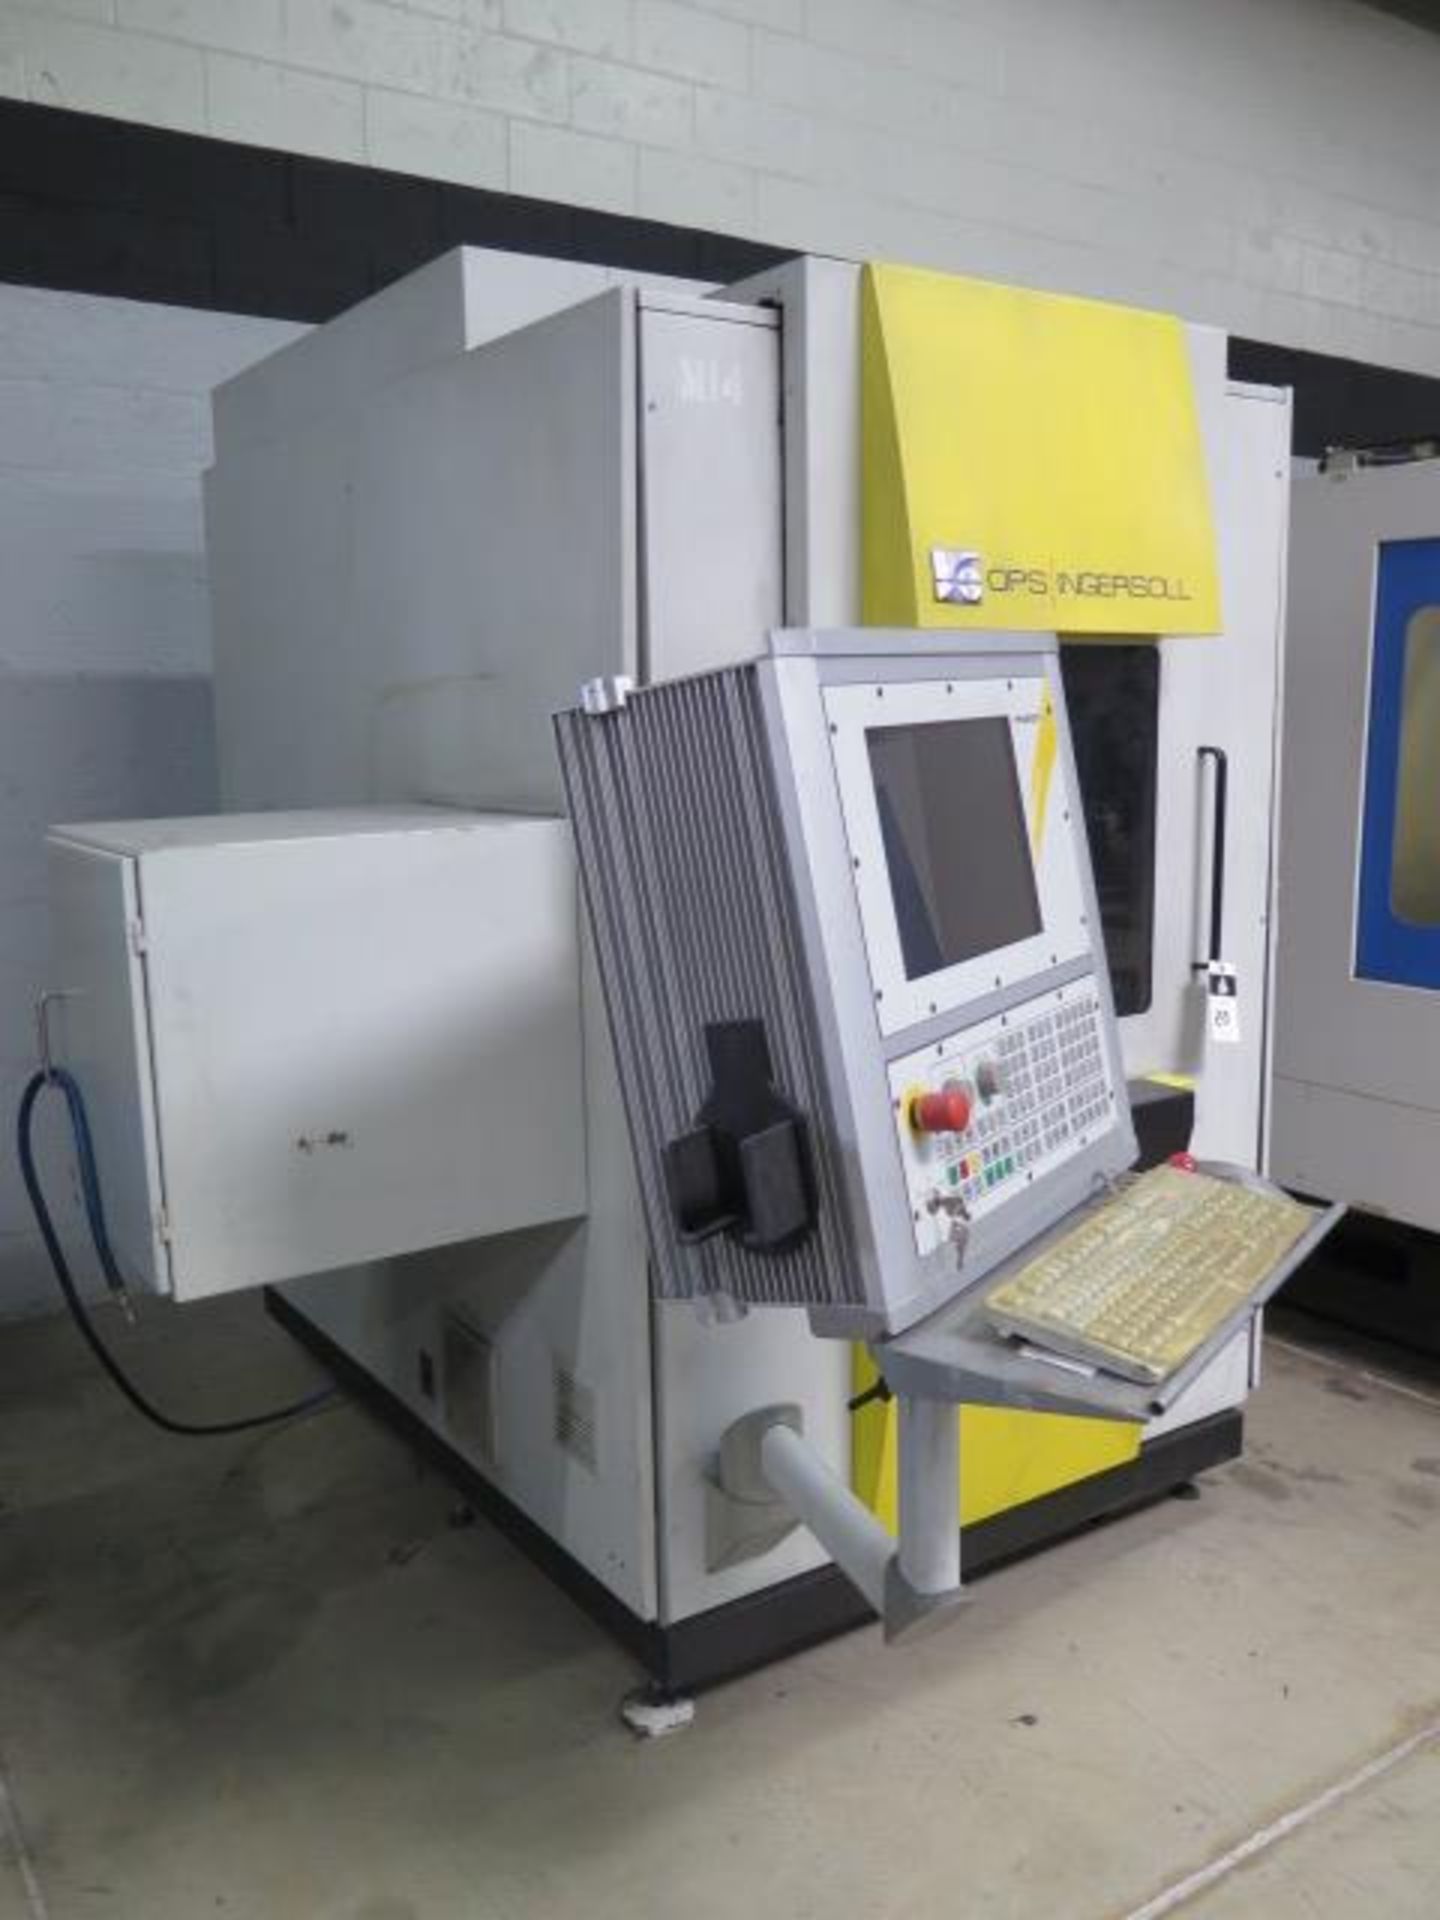 2004 Ops / Ingersoll OPS600 CNC Graphite Machining Center s/n 660098 w 40,000 RPM, SOLD AS IS - Image 3 of 10